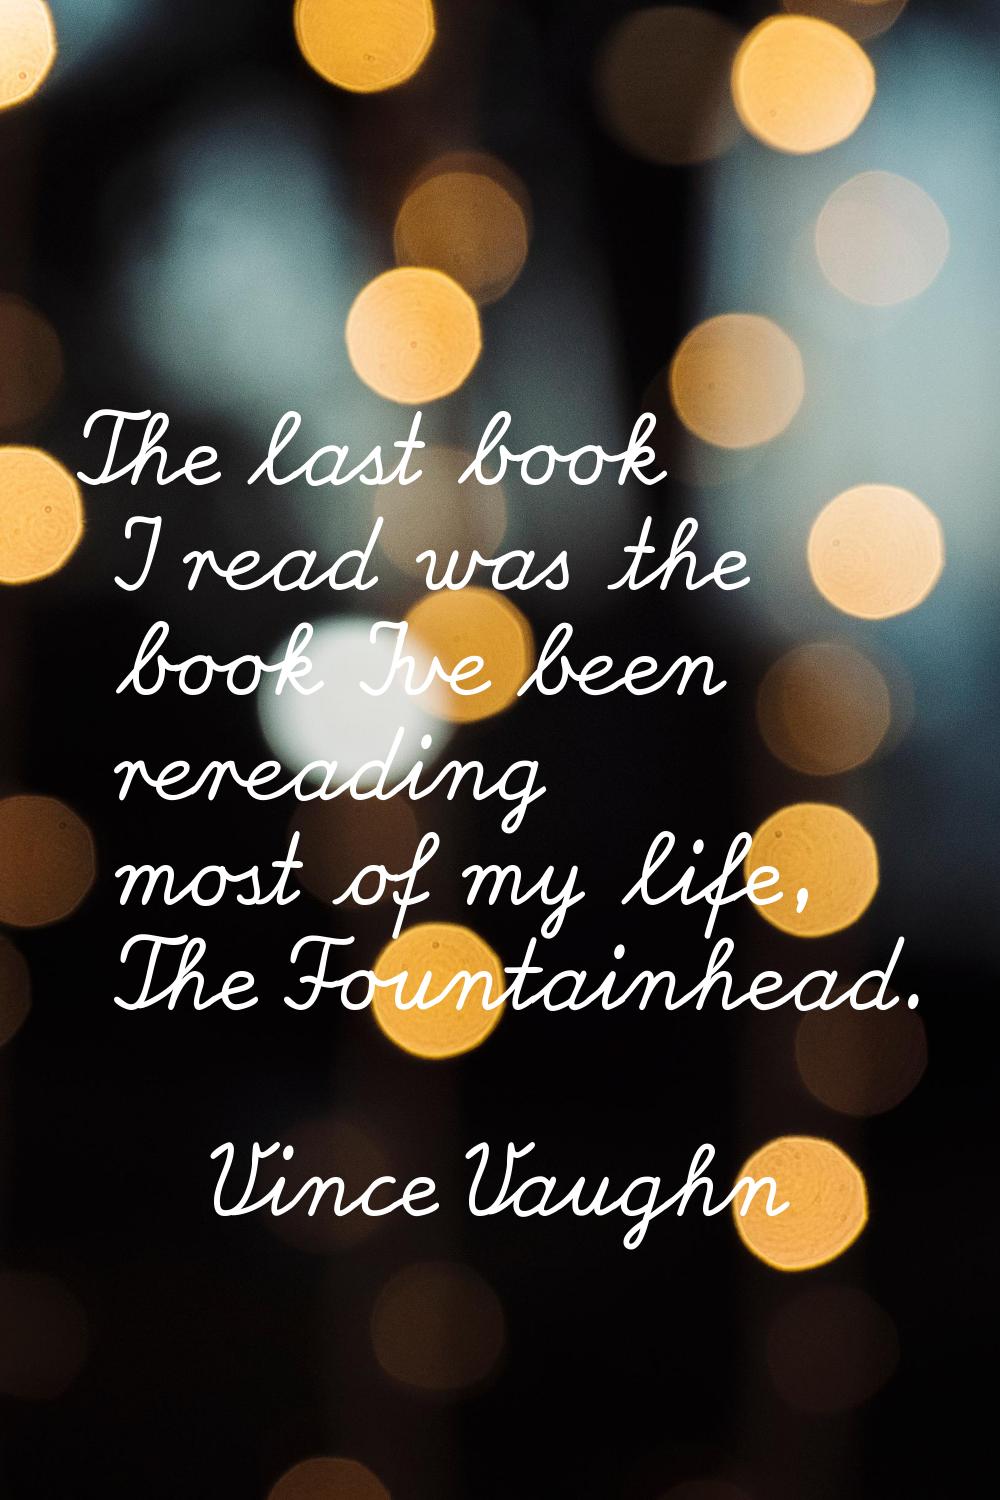 The last book I read was the book I've been rereading most of my life, The Fountainhead.